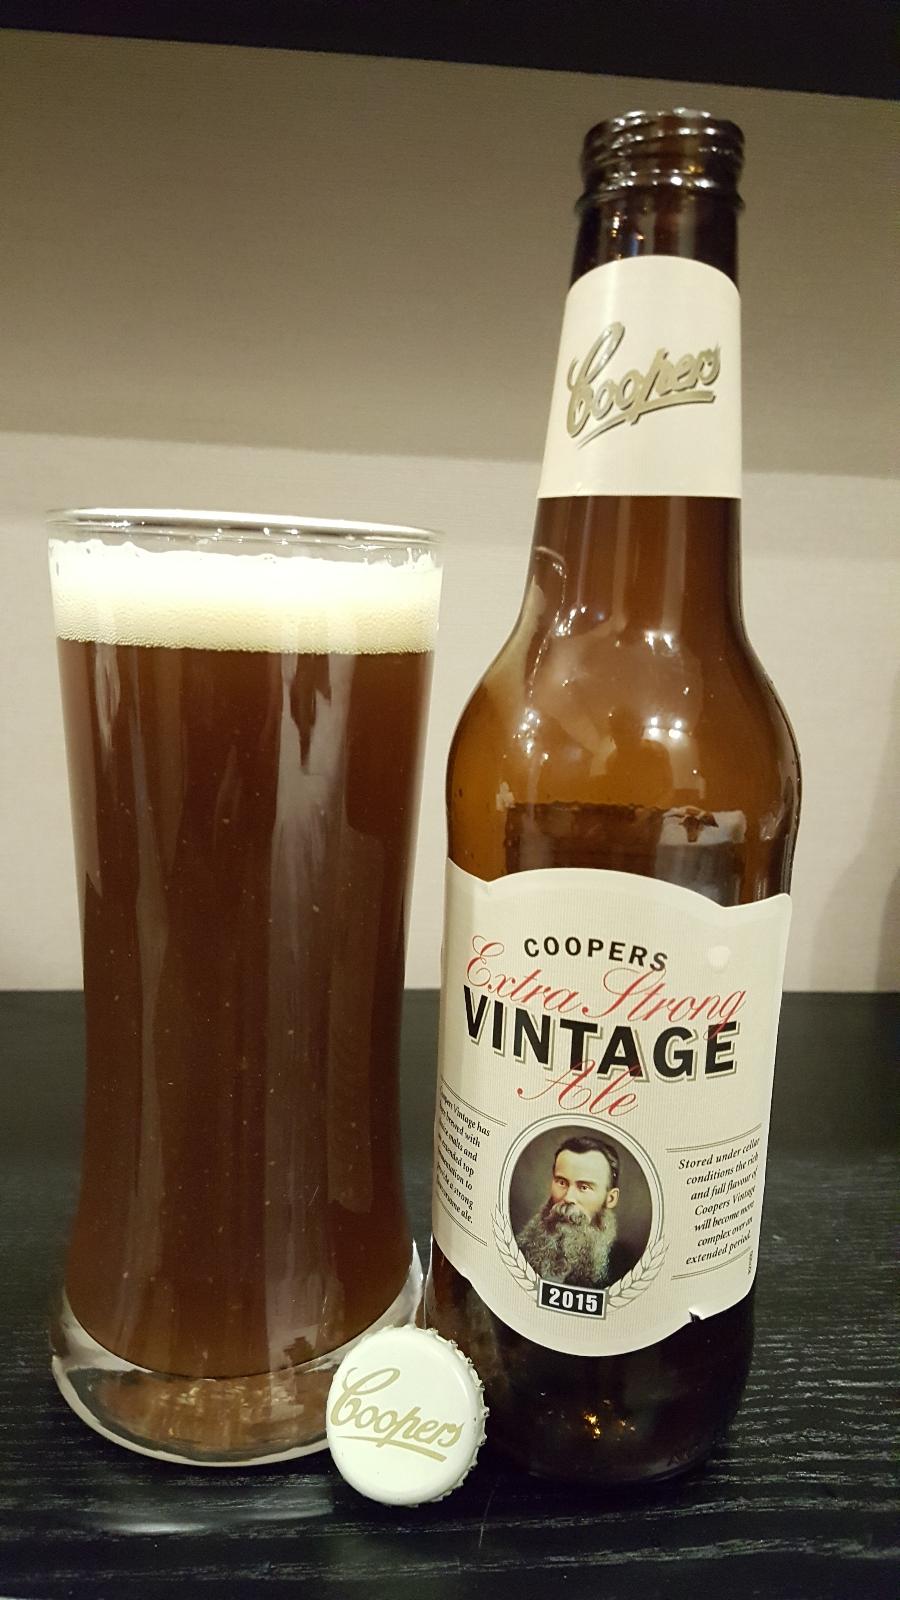 Coopers Extra Strong Vintage Ale (2015)